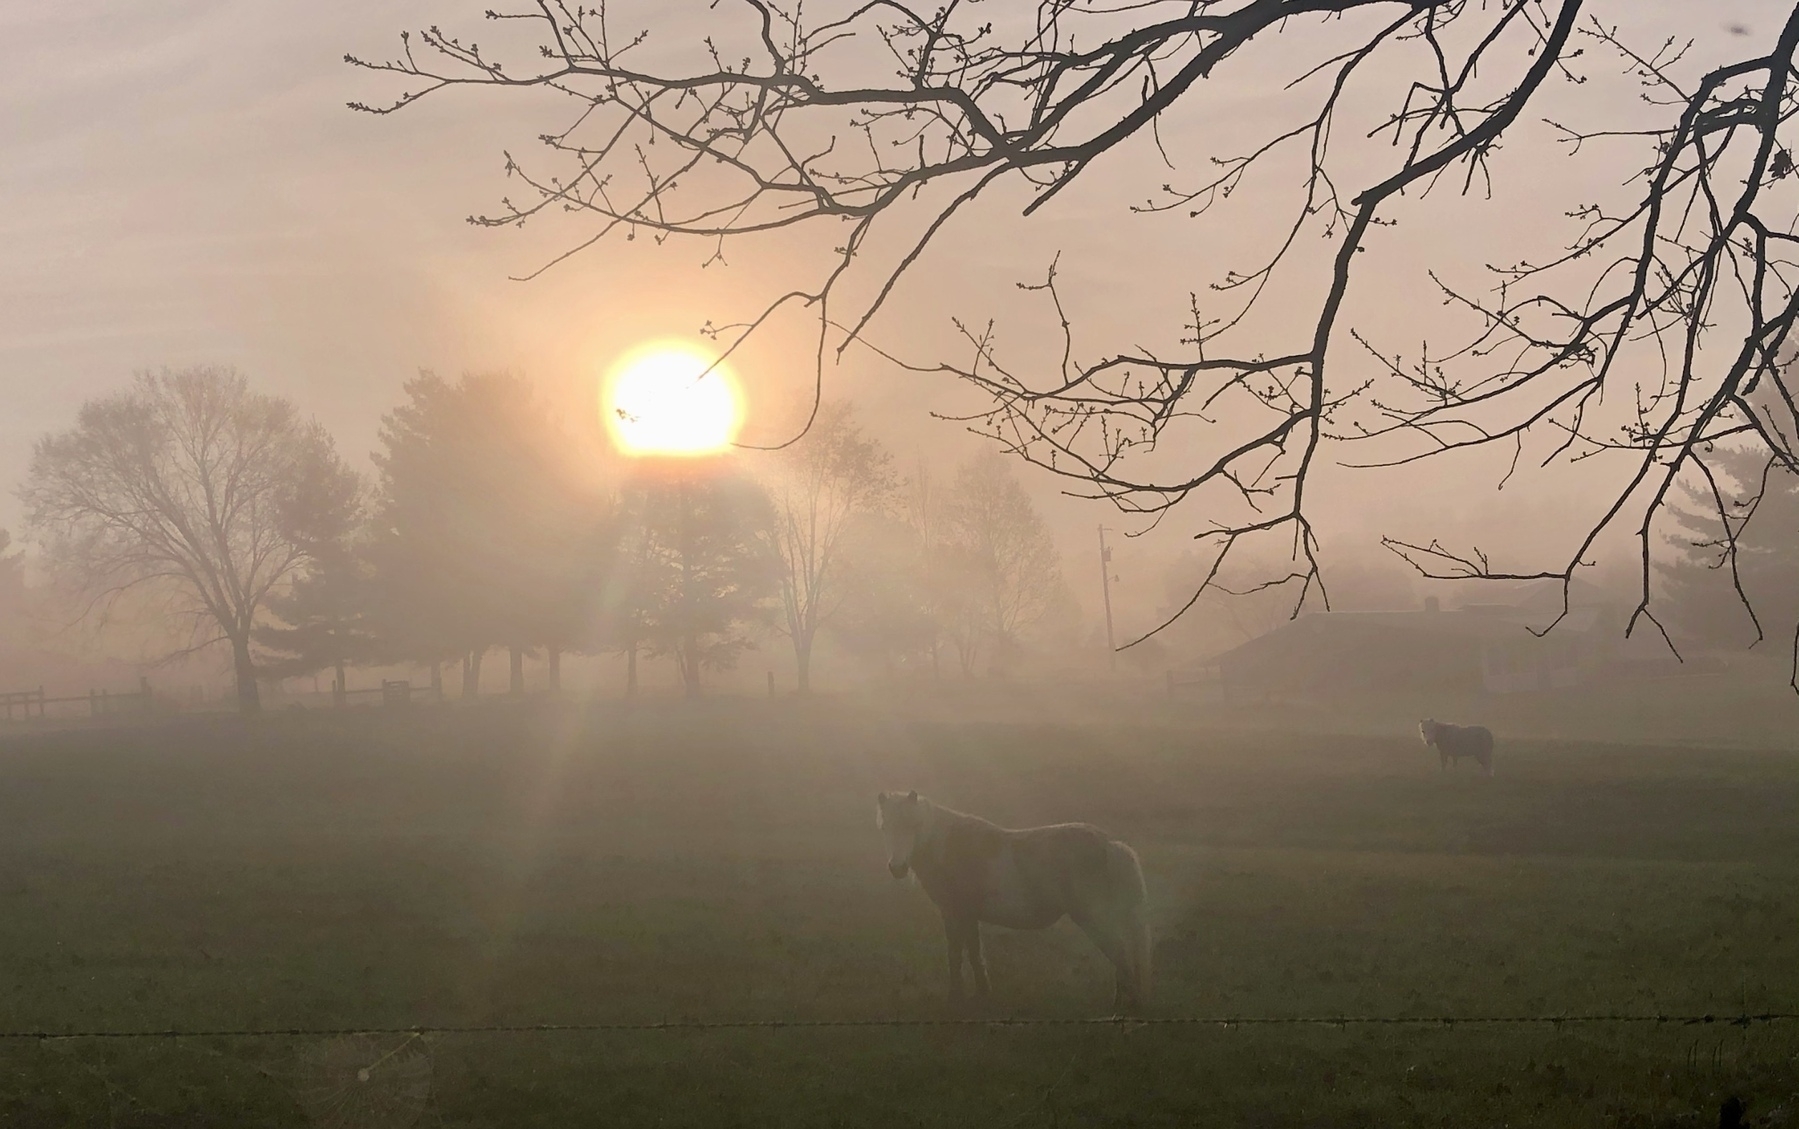 An early morning foggy sunrise over a field with two small horses